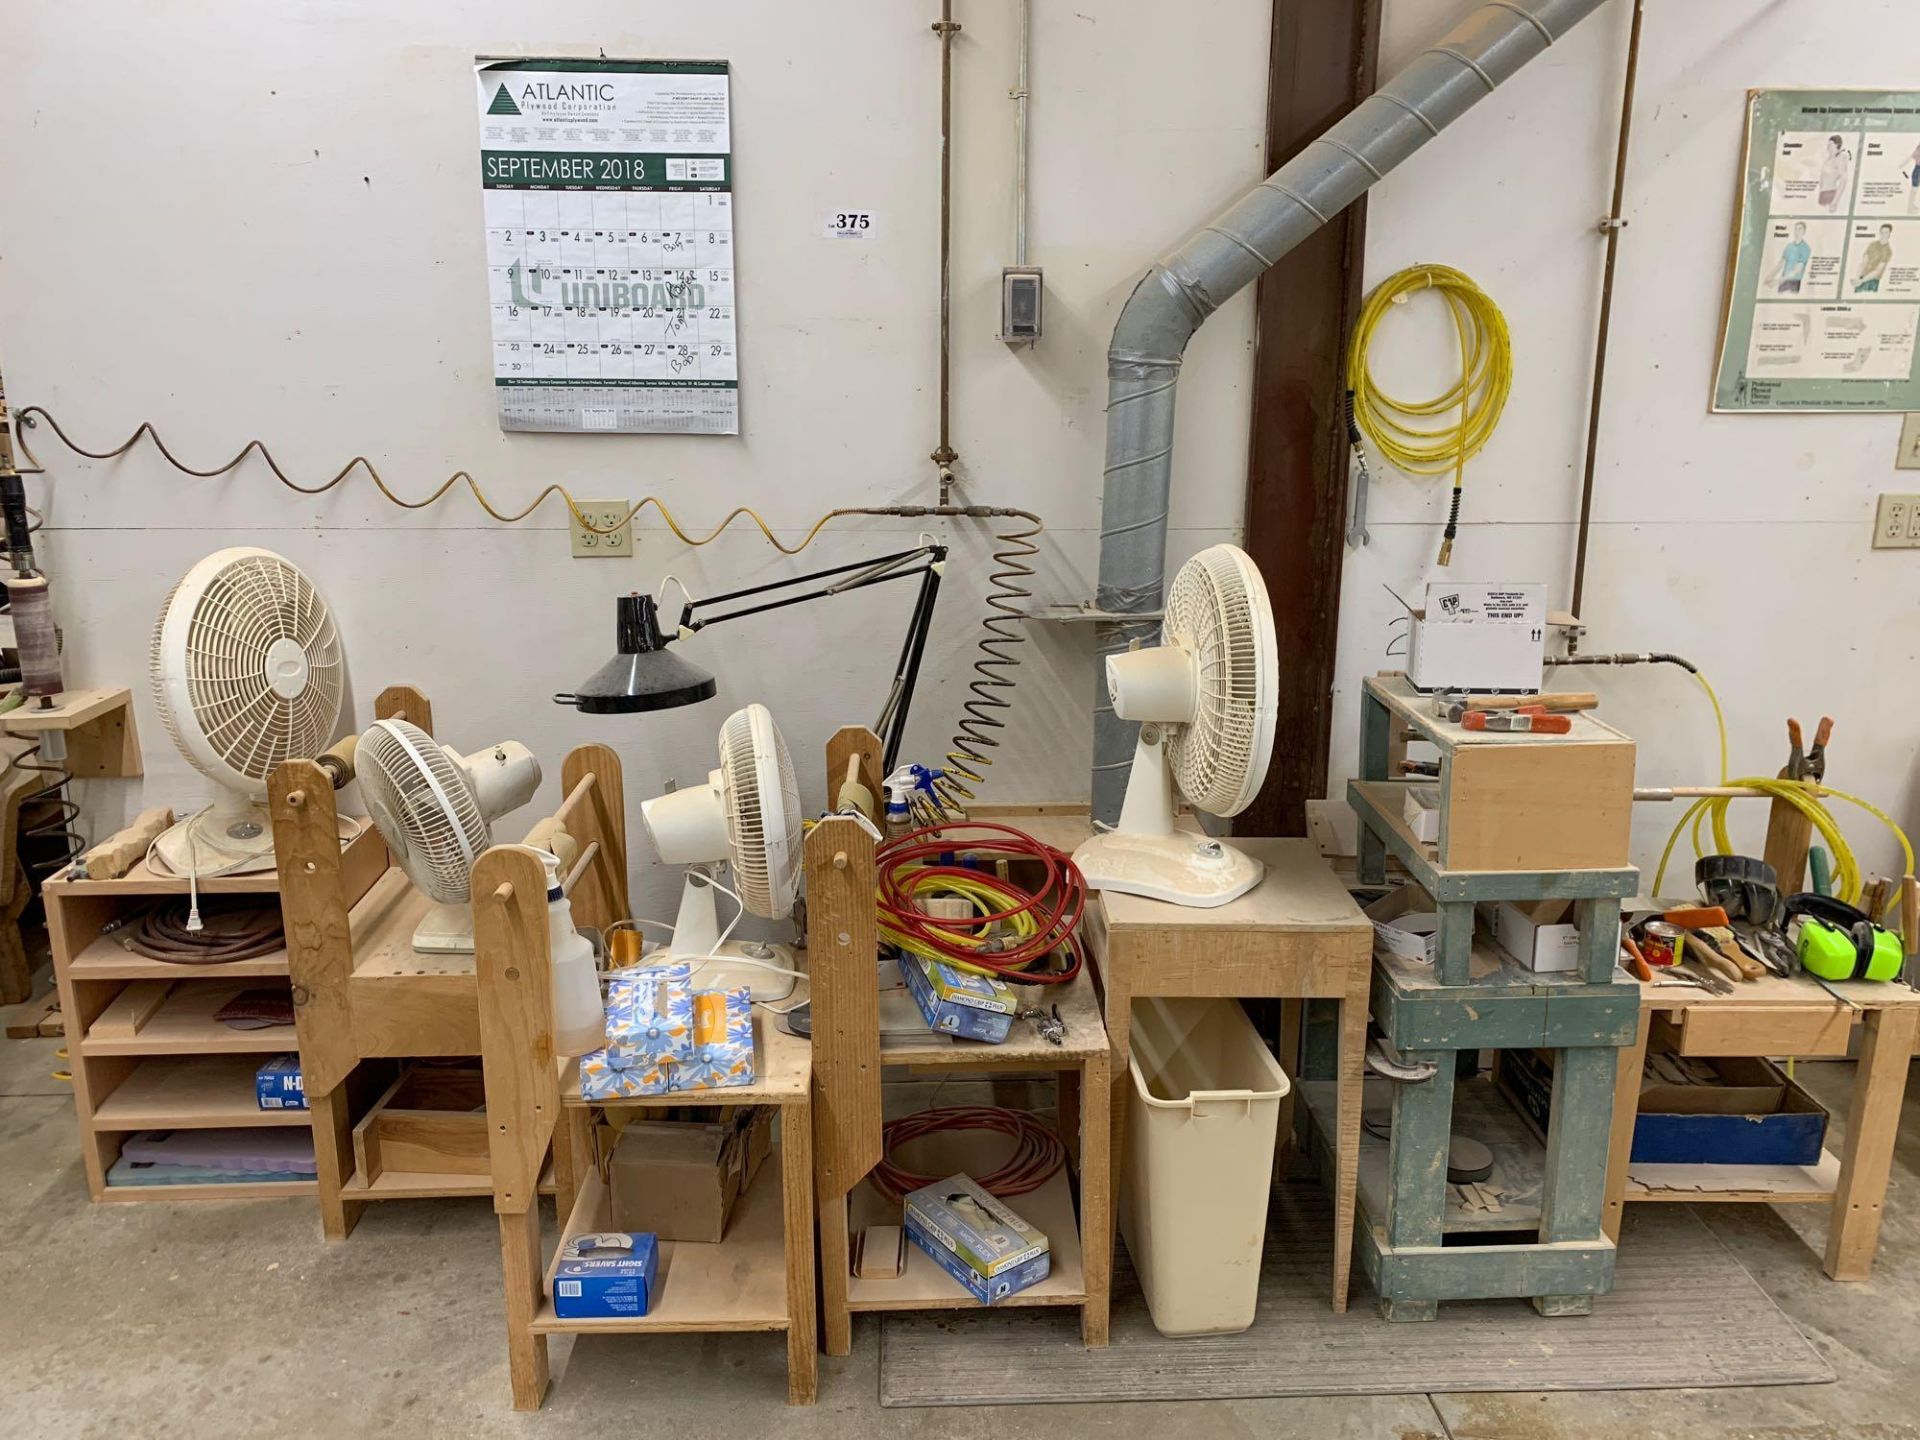 Wall lot to include hand tools, fans, small tables and air hoses